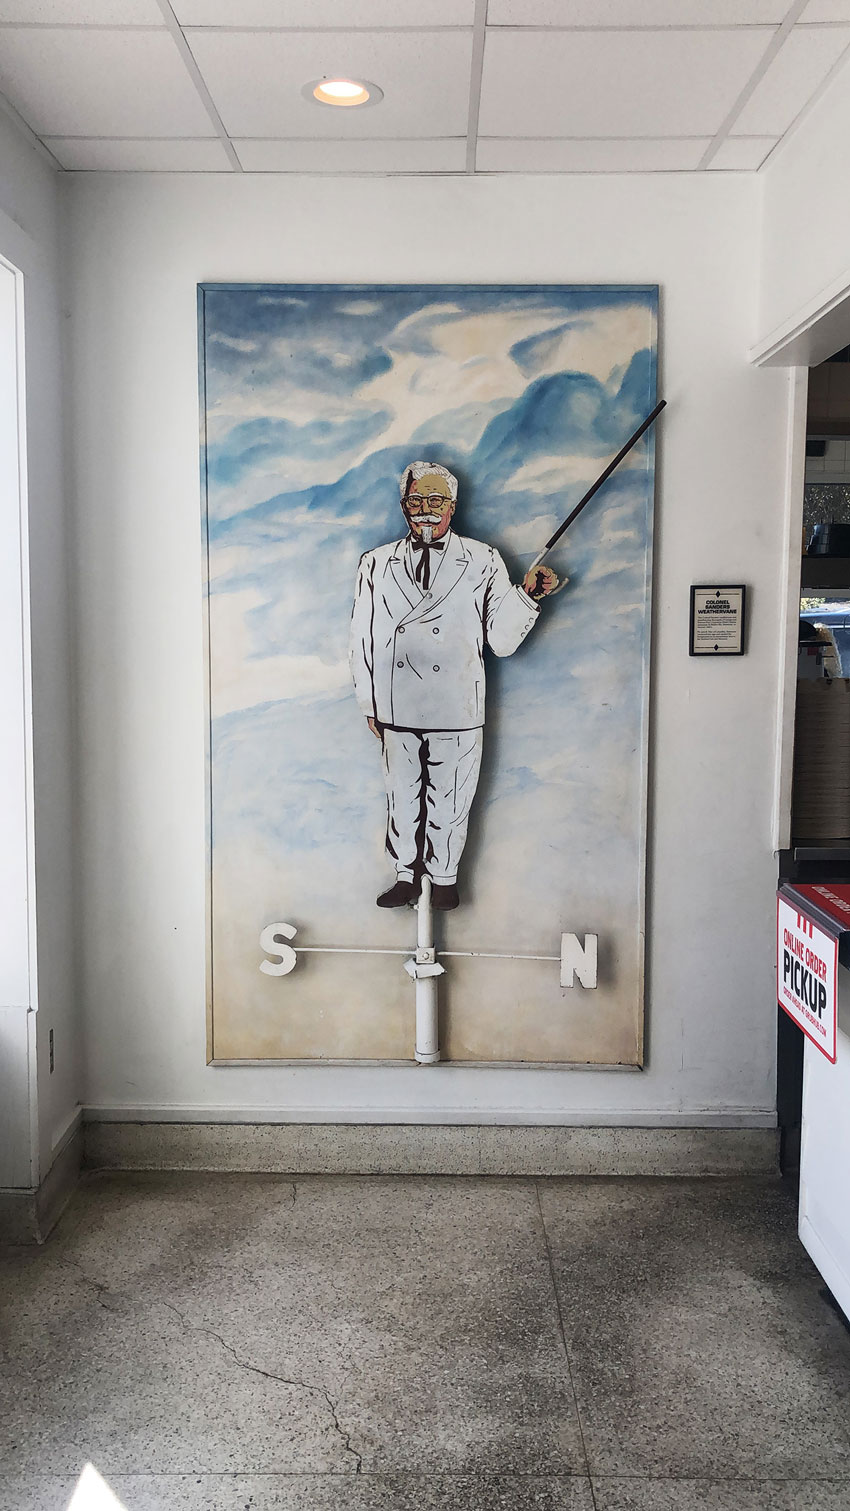 A painting of KFC's Colonel Sanders atop a weathervane shot by Steve Craft for the American Optometric Association